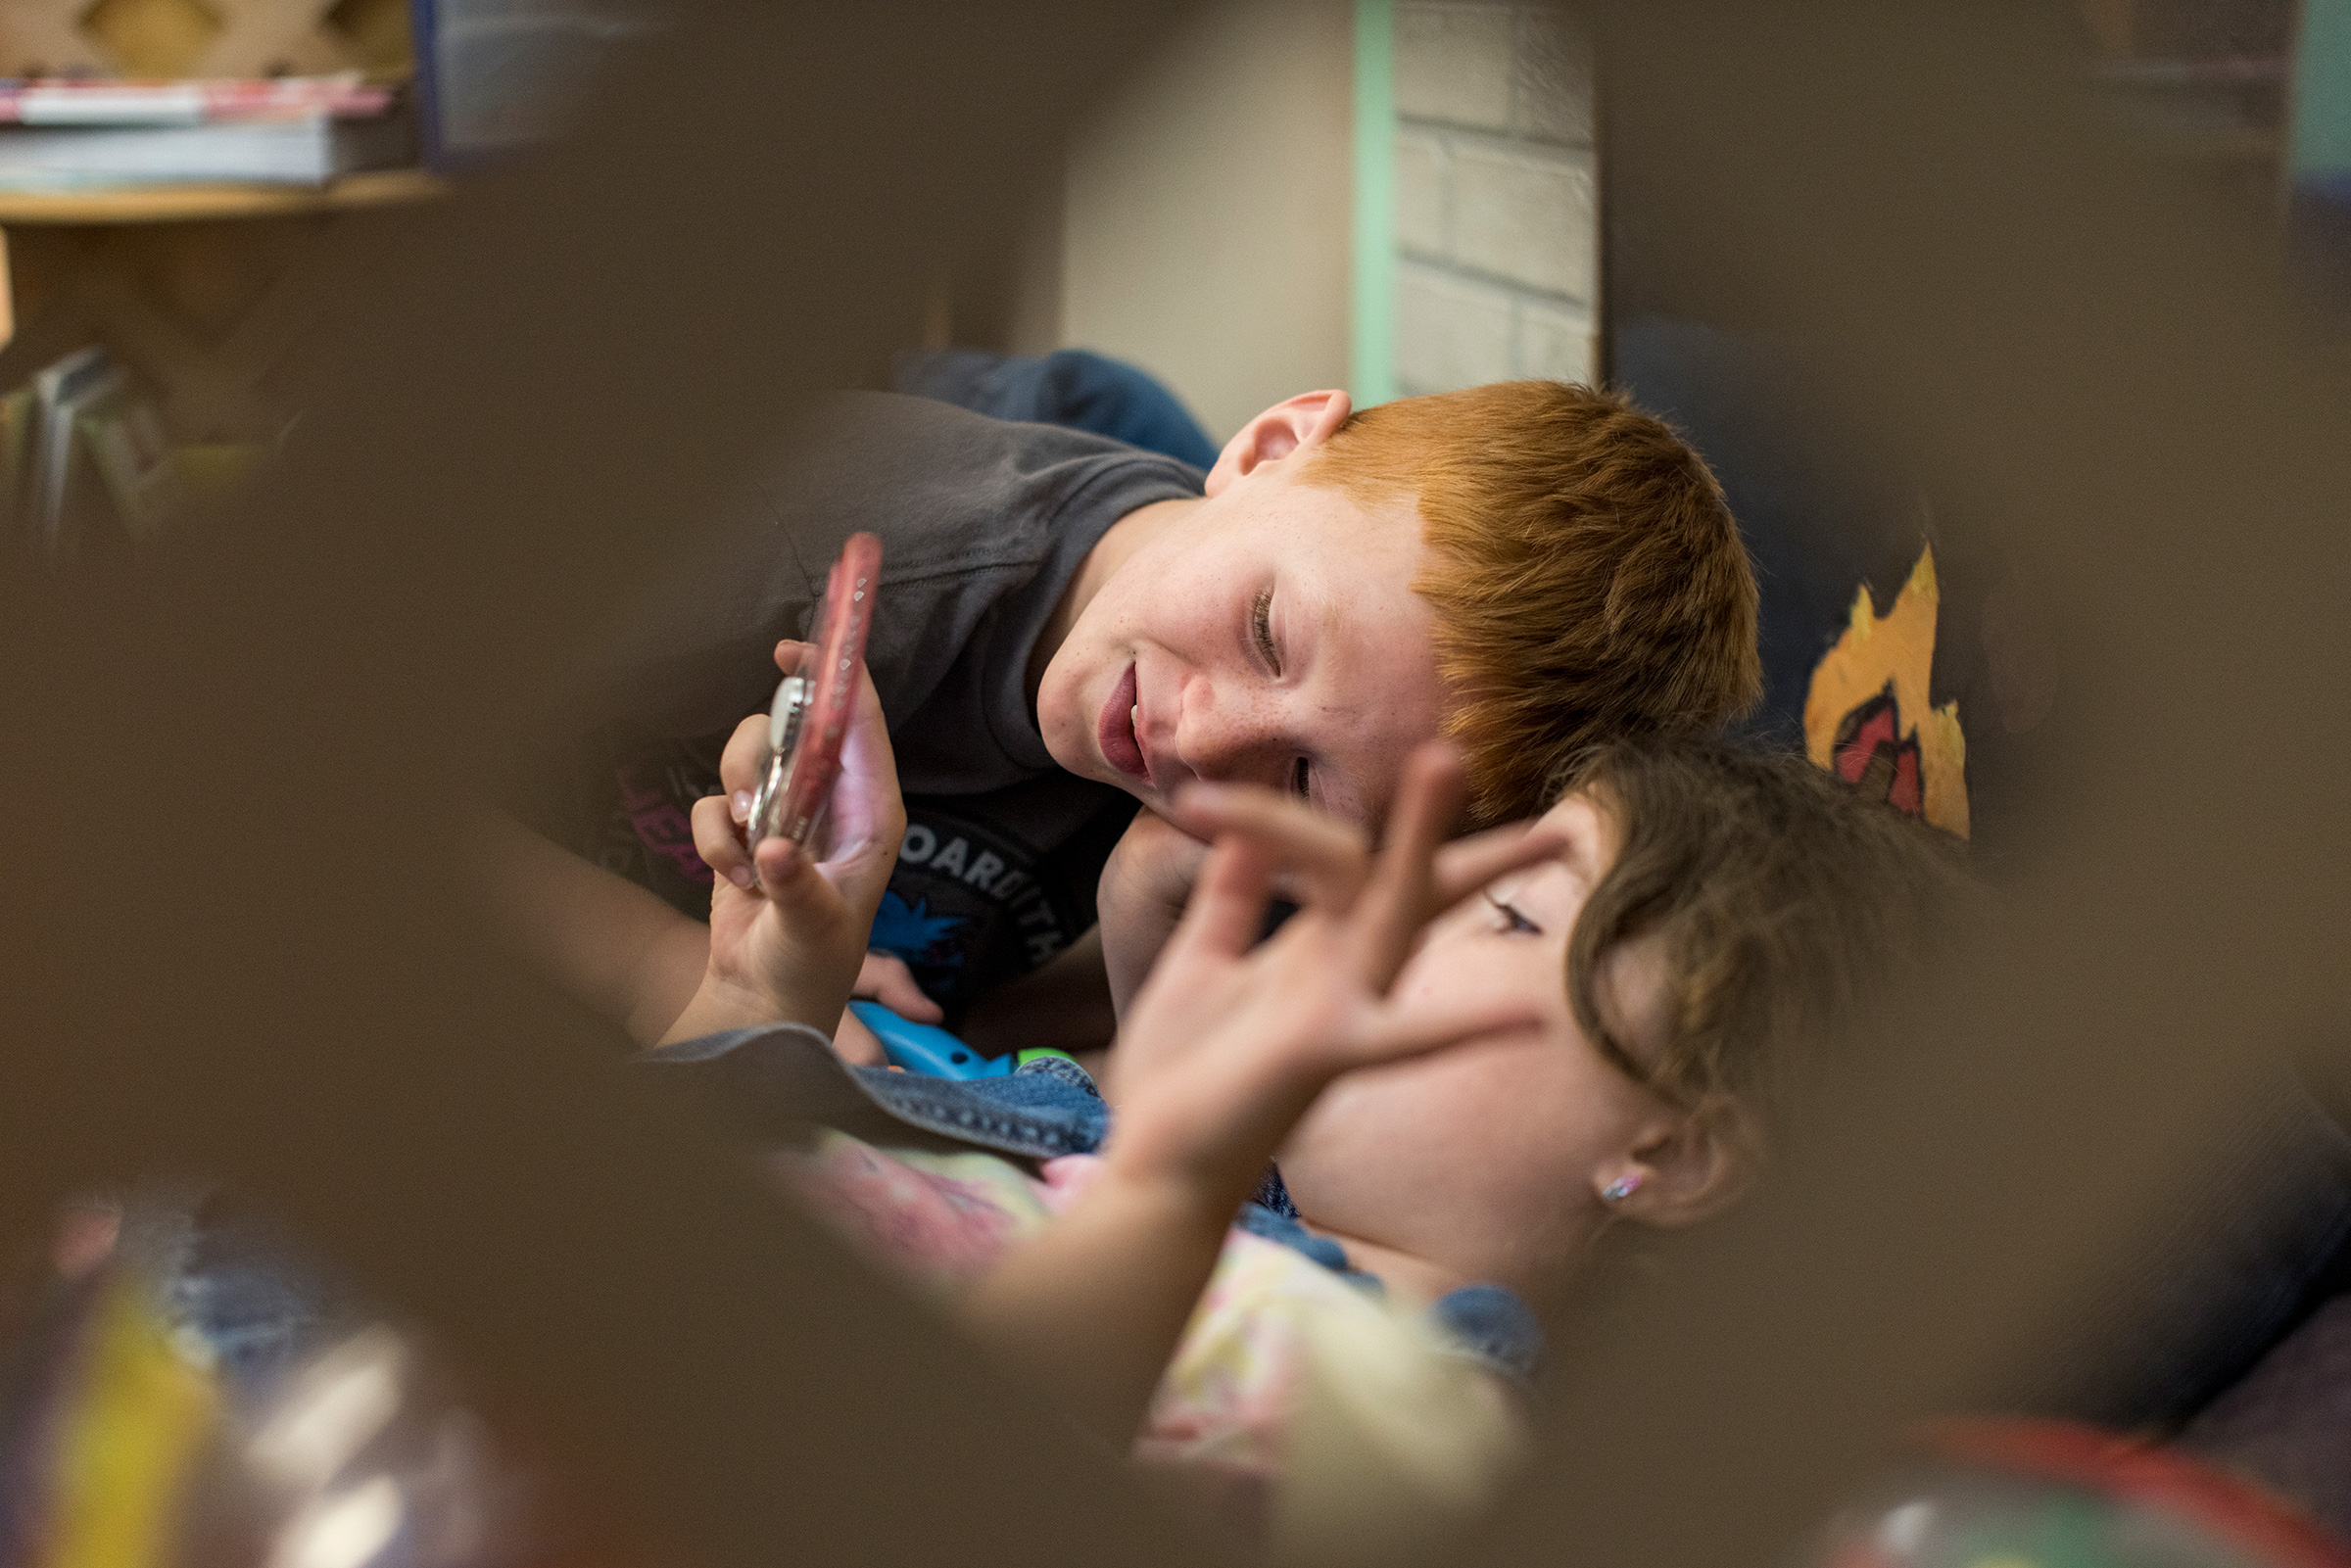 Hunter Rutkowski, age 10, and Alice Nefzger, age 8, are among the school-aged children who attended the daycare during the summer. (Kathryn Gamble for TIME)